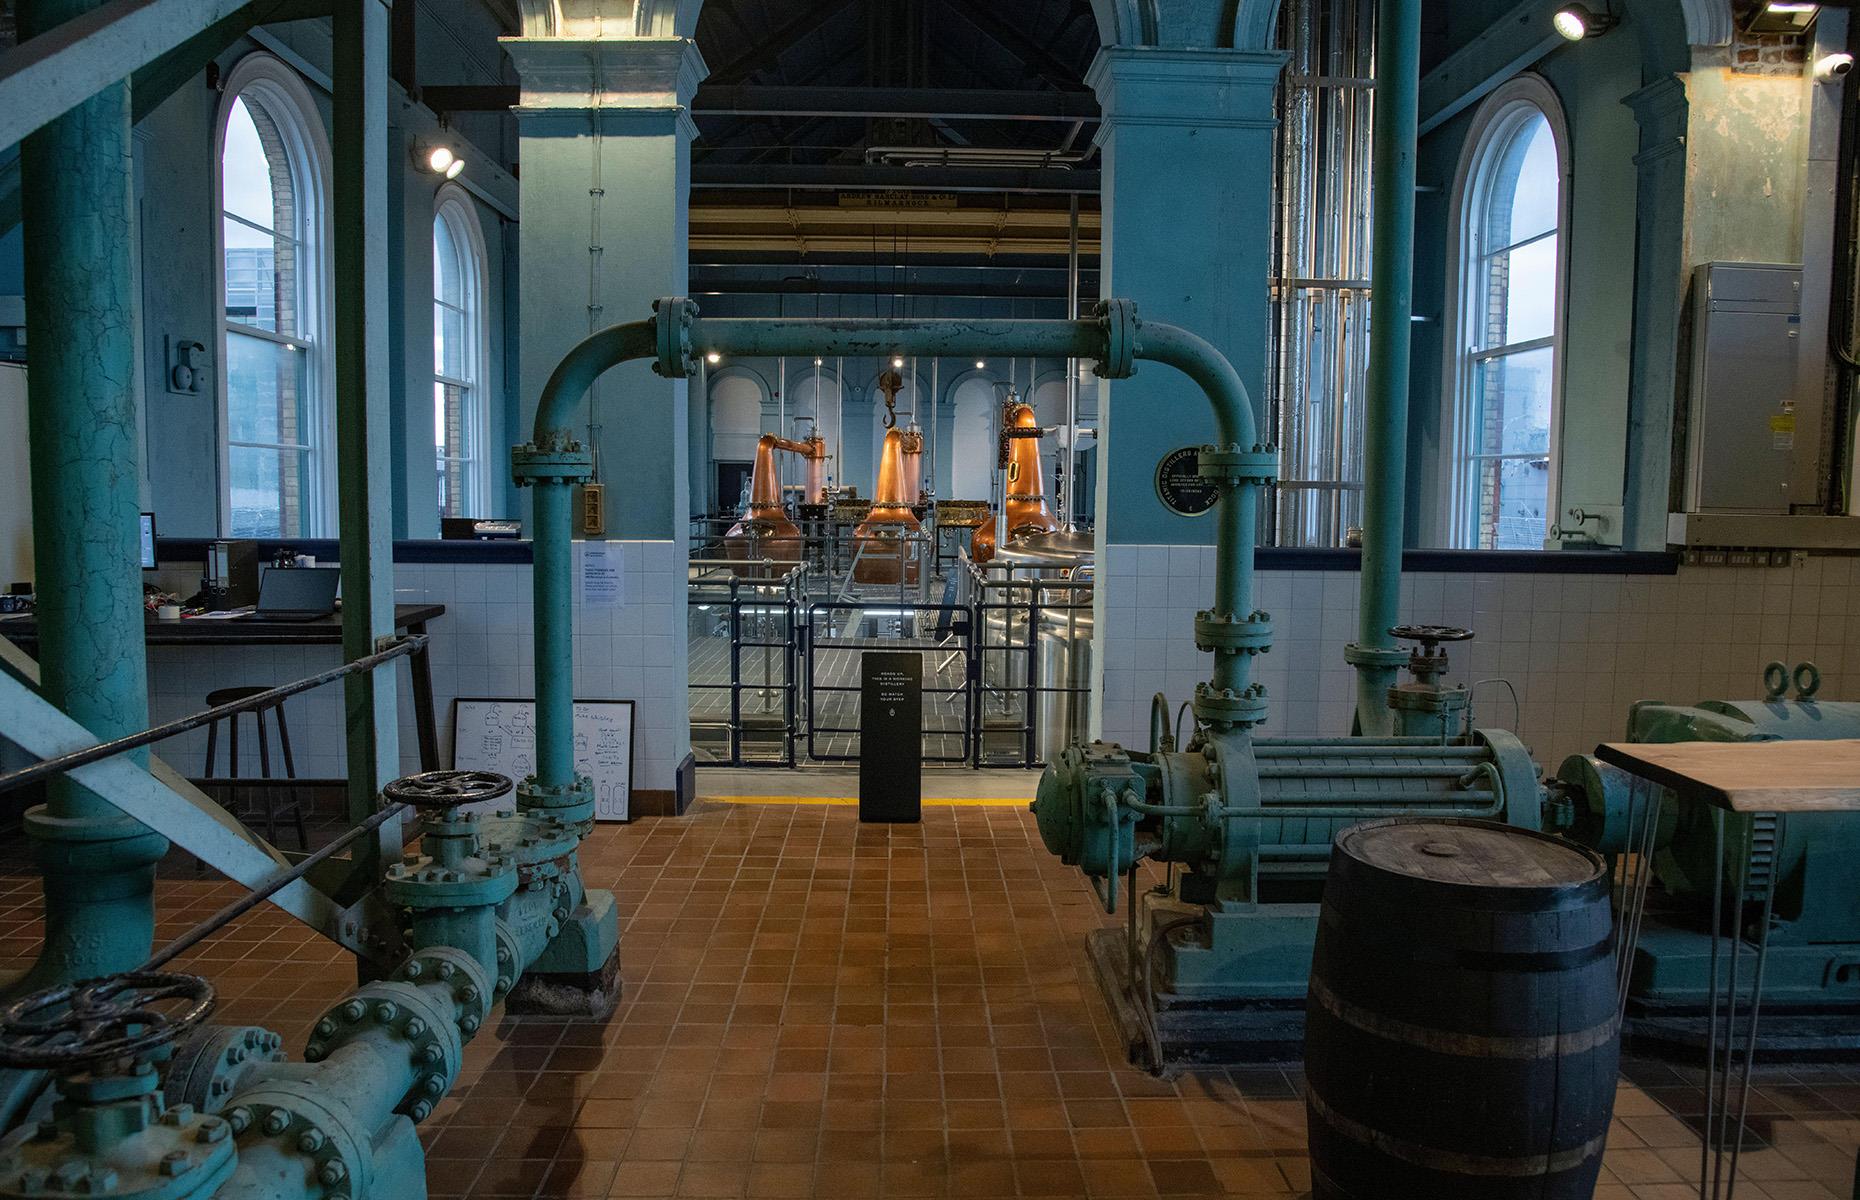 <p>While exploring Belfast’s rapidly developing 10-km (six-mile) Maritime Mile along the waterfront, you’ll want to stop by the <a href="https://www.titanicdistillers.com/">Titanic Distillers</a>, a new distillery based out of a former pumphouse that once serviced the Titanic, as well as many other ships. Distillery tours take visitors on a journey through the building’s history, from its original use – as a pumphouse, it was the last spot where Titanic rested on dry ground before she set sail – to its restoration and renovation into the distillery, including an explanation of the whiskey making process.</p>